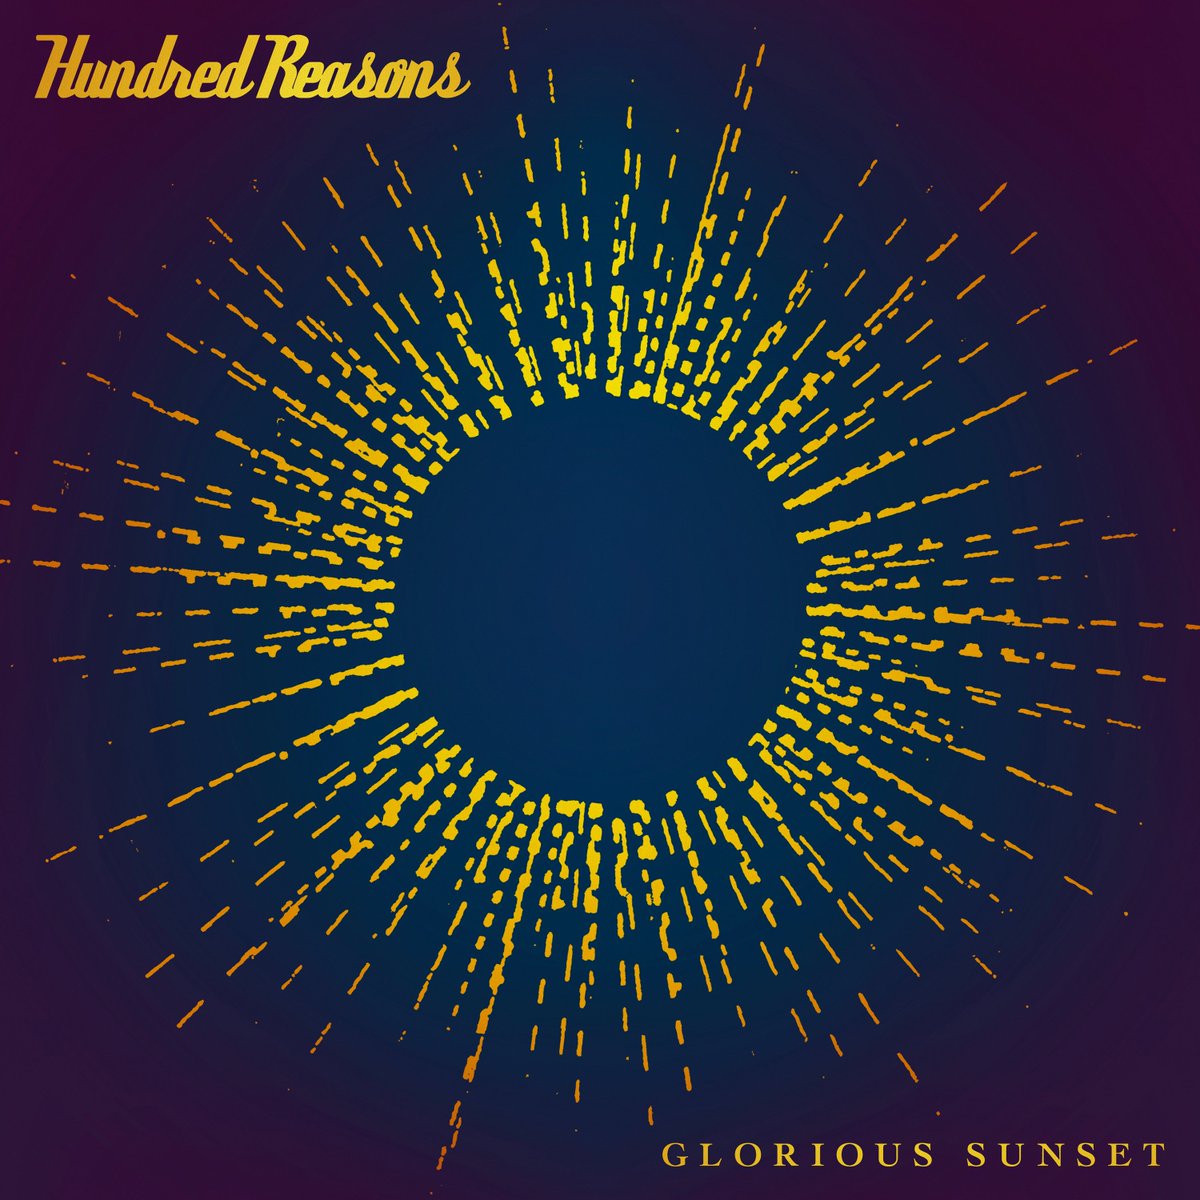 'Glorious Sunset' the new album from Hundred Reasons is officially out everywhere. Buy it, stream it, do what you want with it: lnk.to/HR-GloriousSun… This album is yours now and we couldn't be more grateful for the continued support. Glasgow, we'll see you tonight!